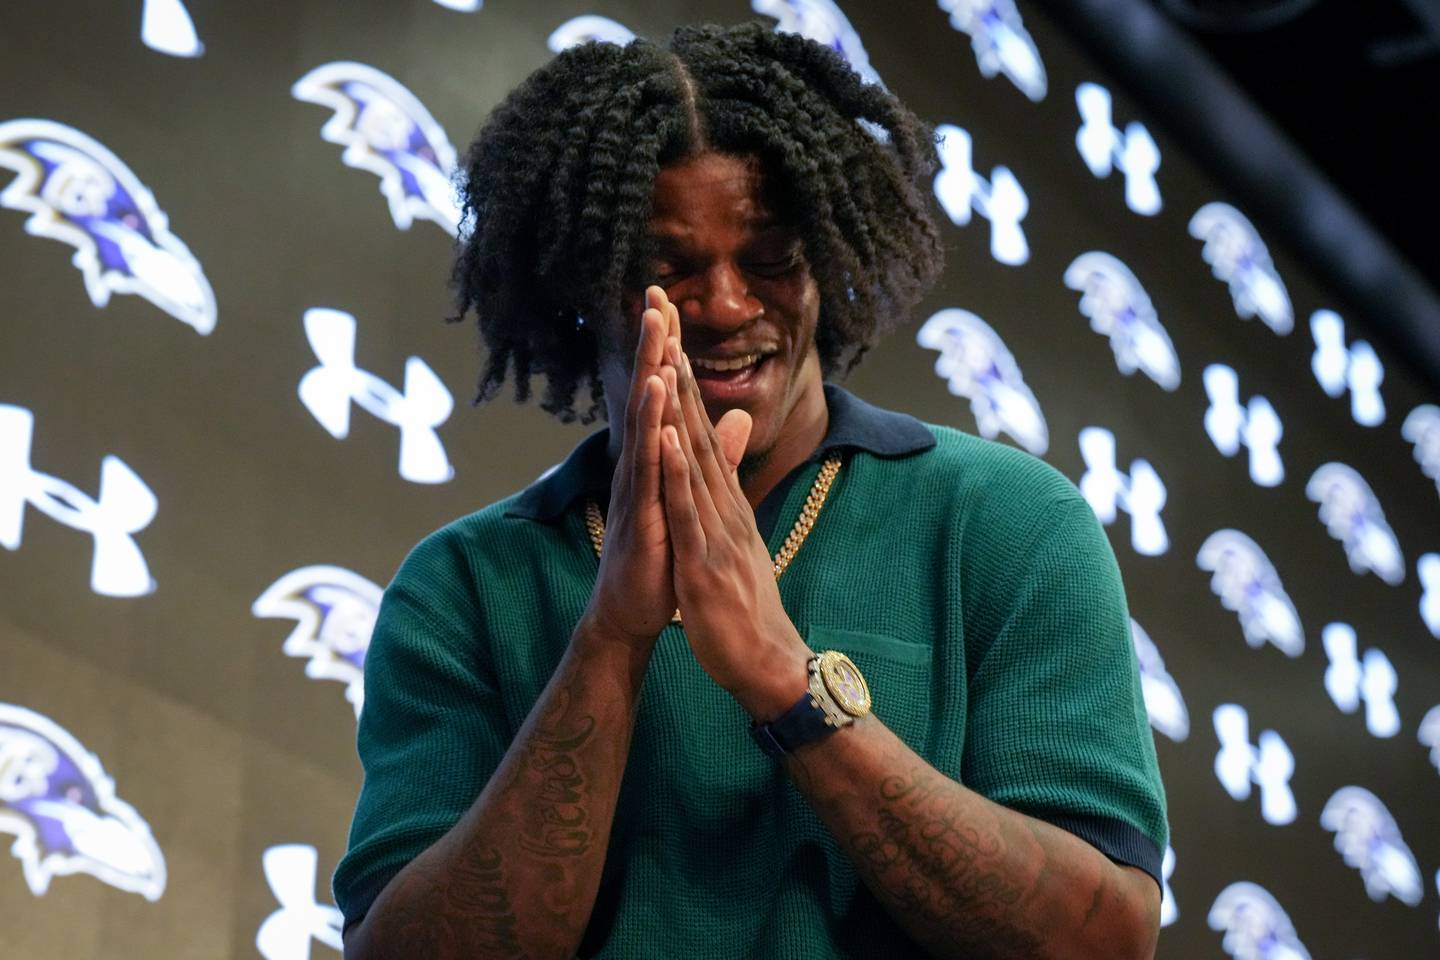 Baltimore Ravens quarterback Lamar Jackson laughs during an interview following a press conference at the Under Armour Performance Center on Thursday, May 4. Jackson and the Ravens recently came to an agreement on his contract extension, a 5-year deal worth $260 million.